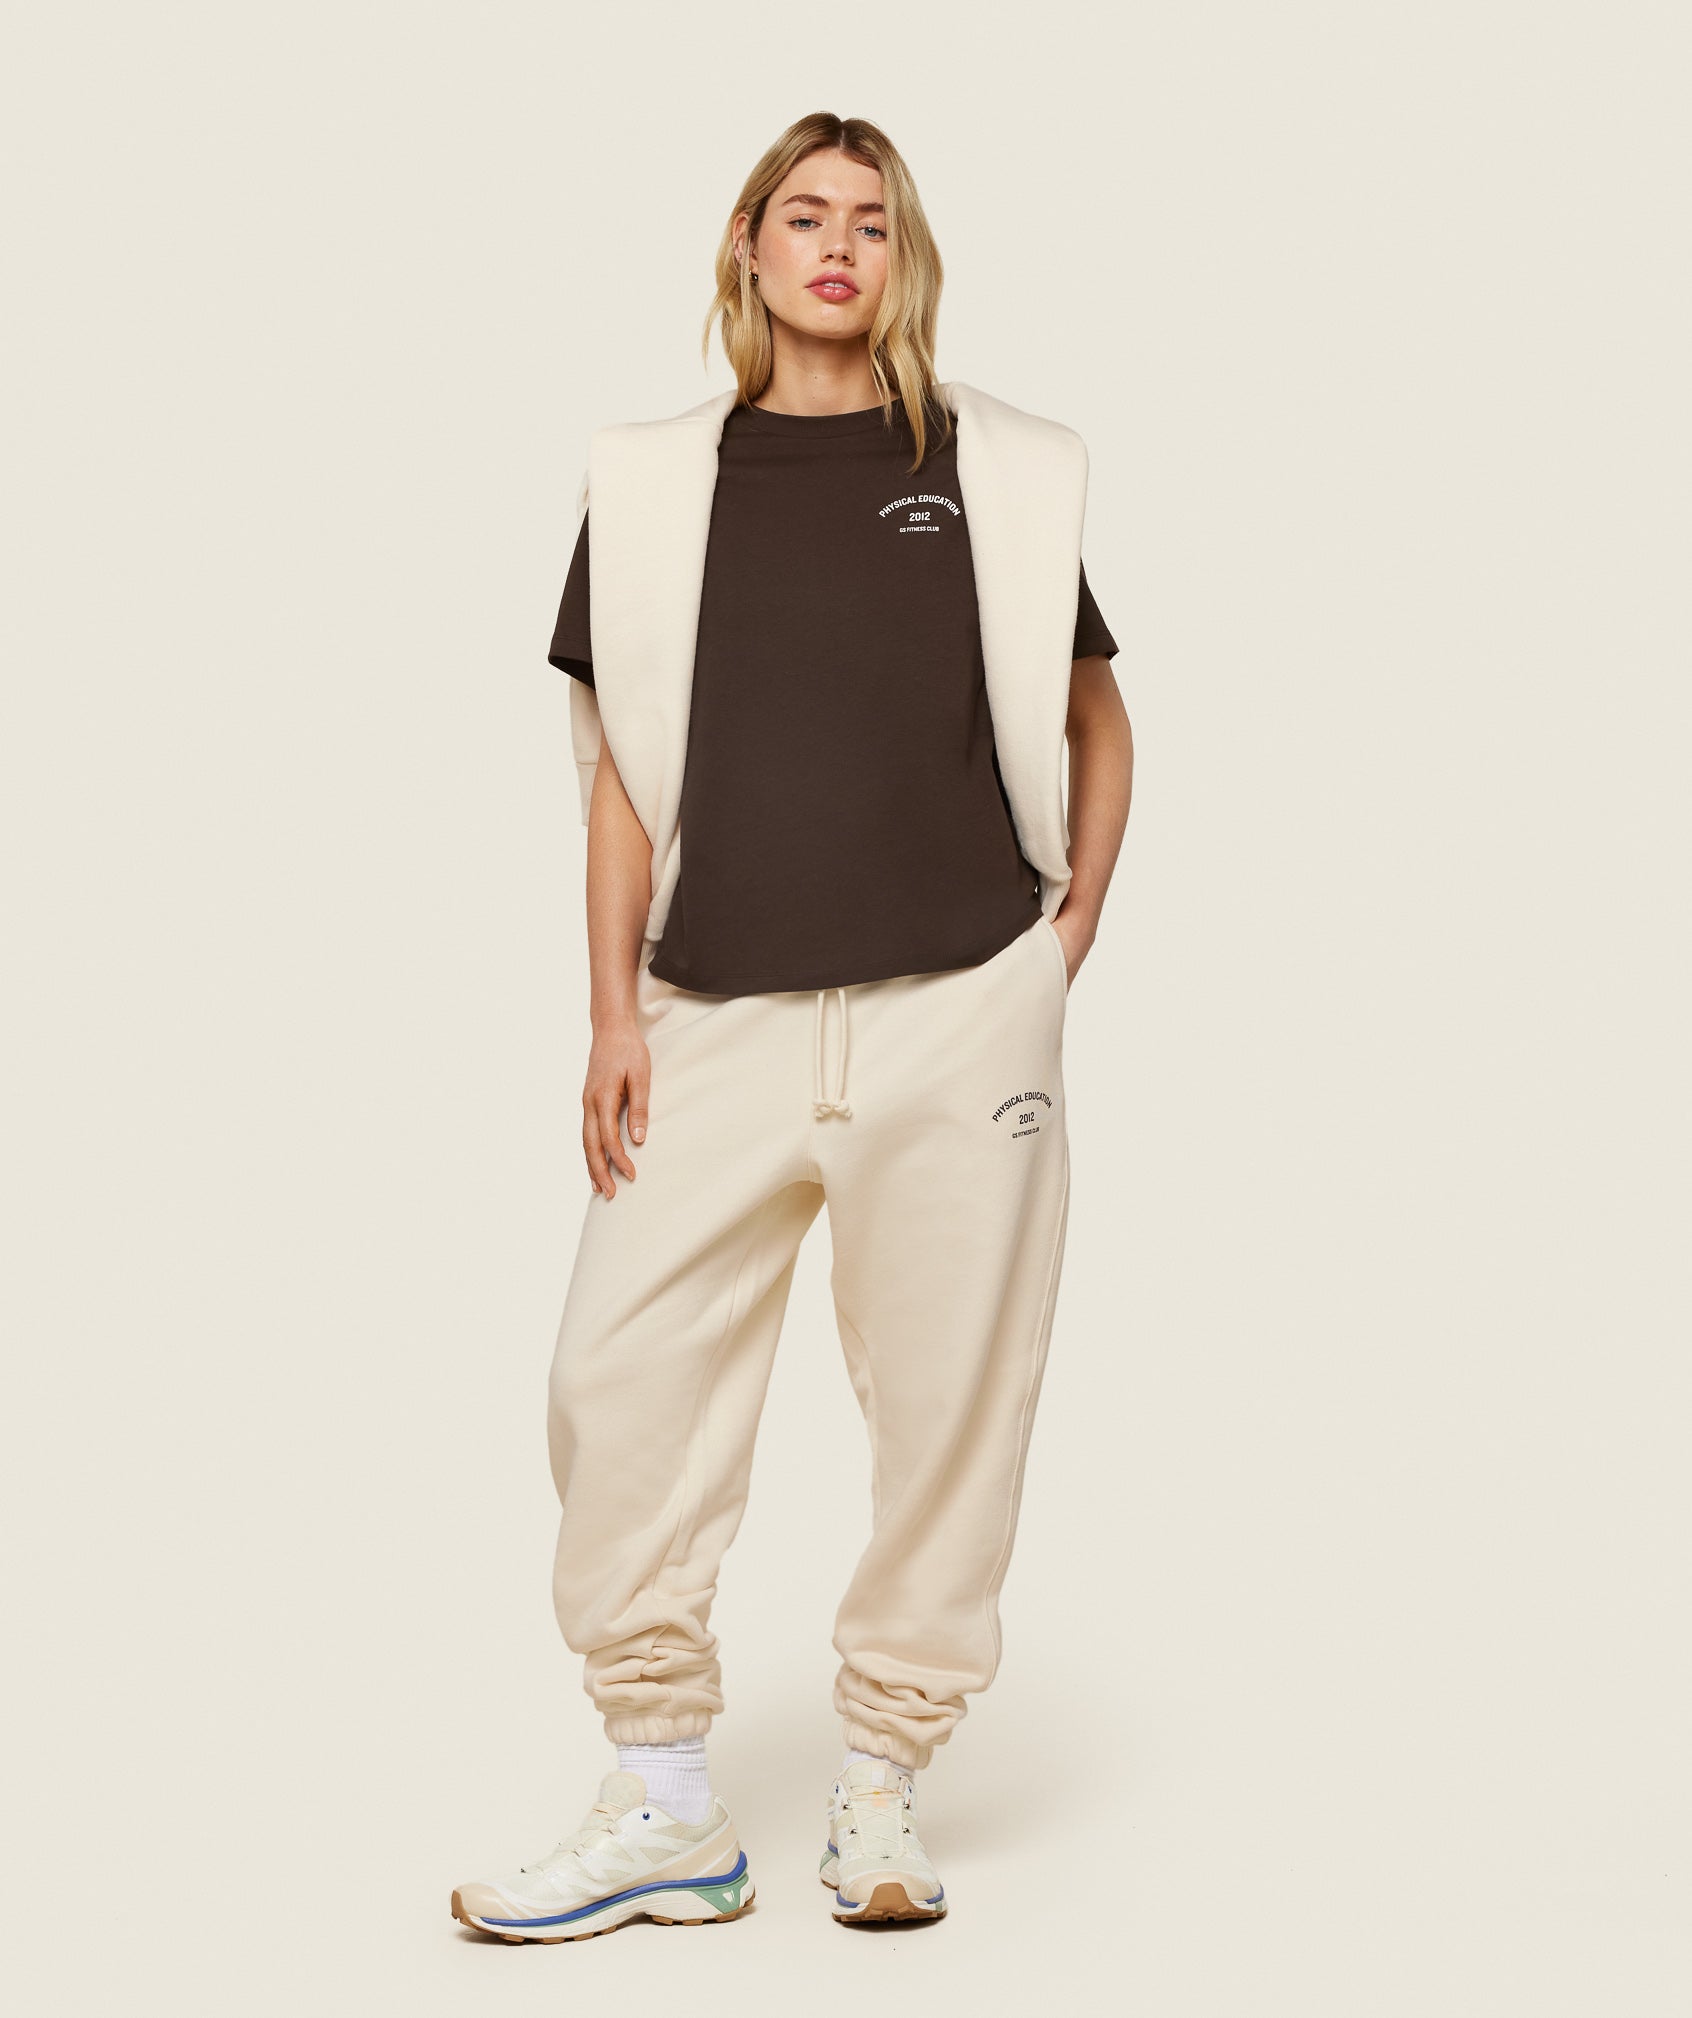 Phys Ed Graphic Sweatpants in Ecru White/Archive Brown - view 4